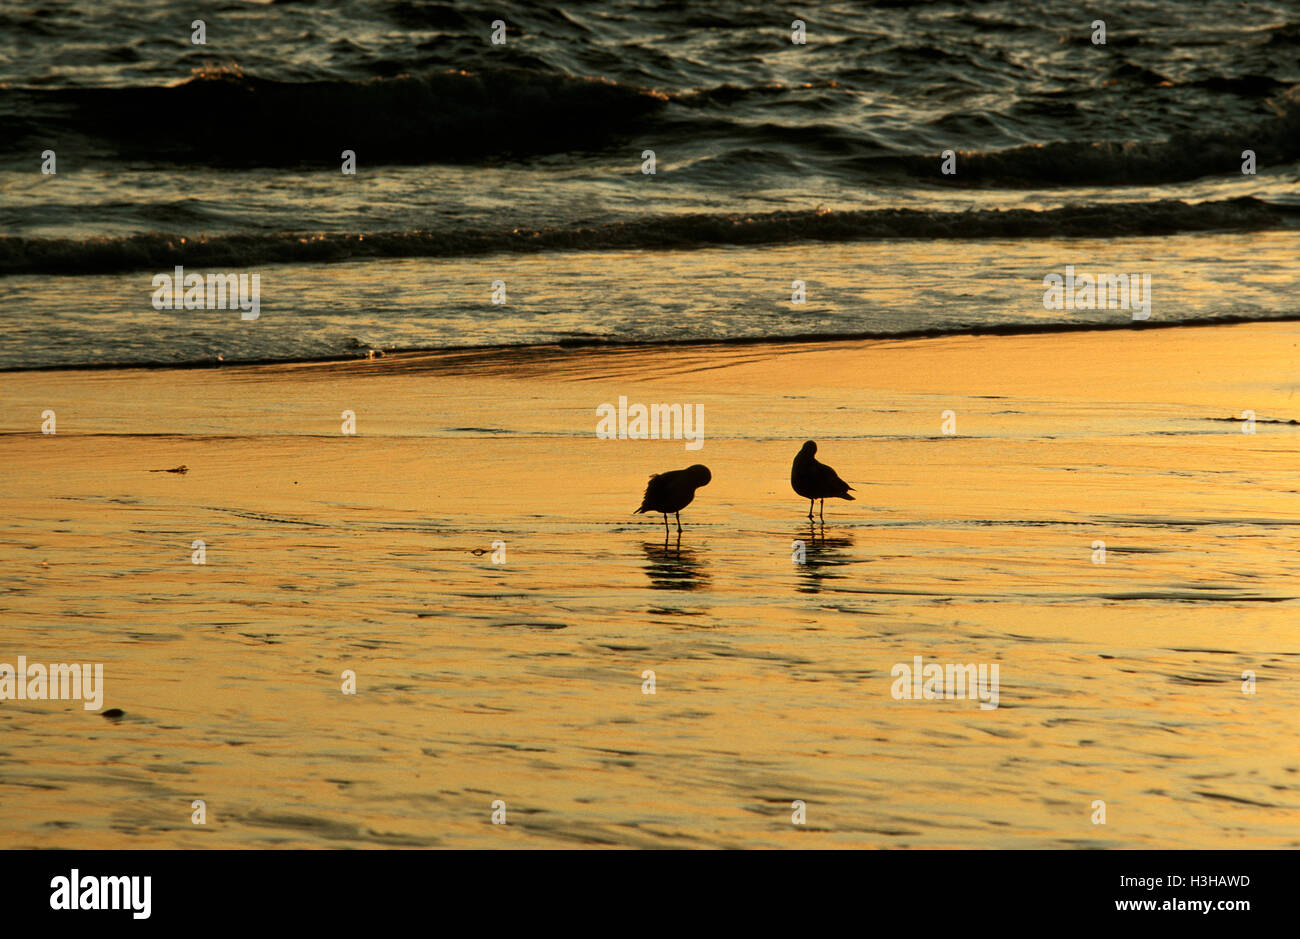 Two shorebirds in shallow water in dawn light. Stock Photo